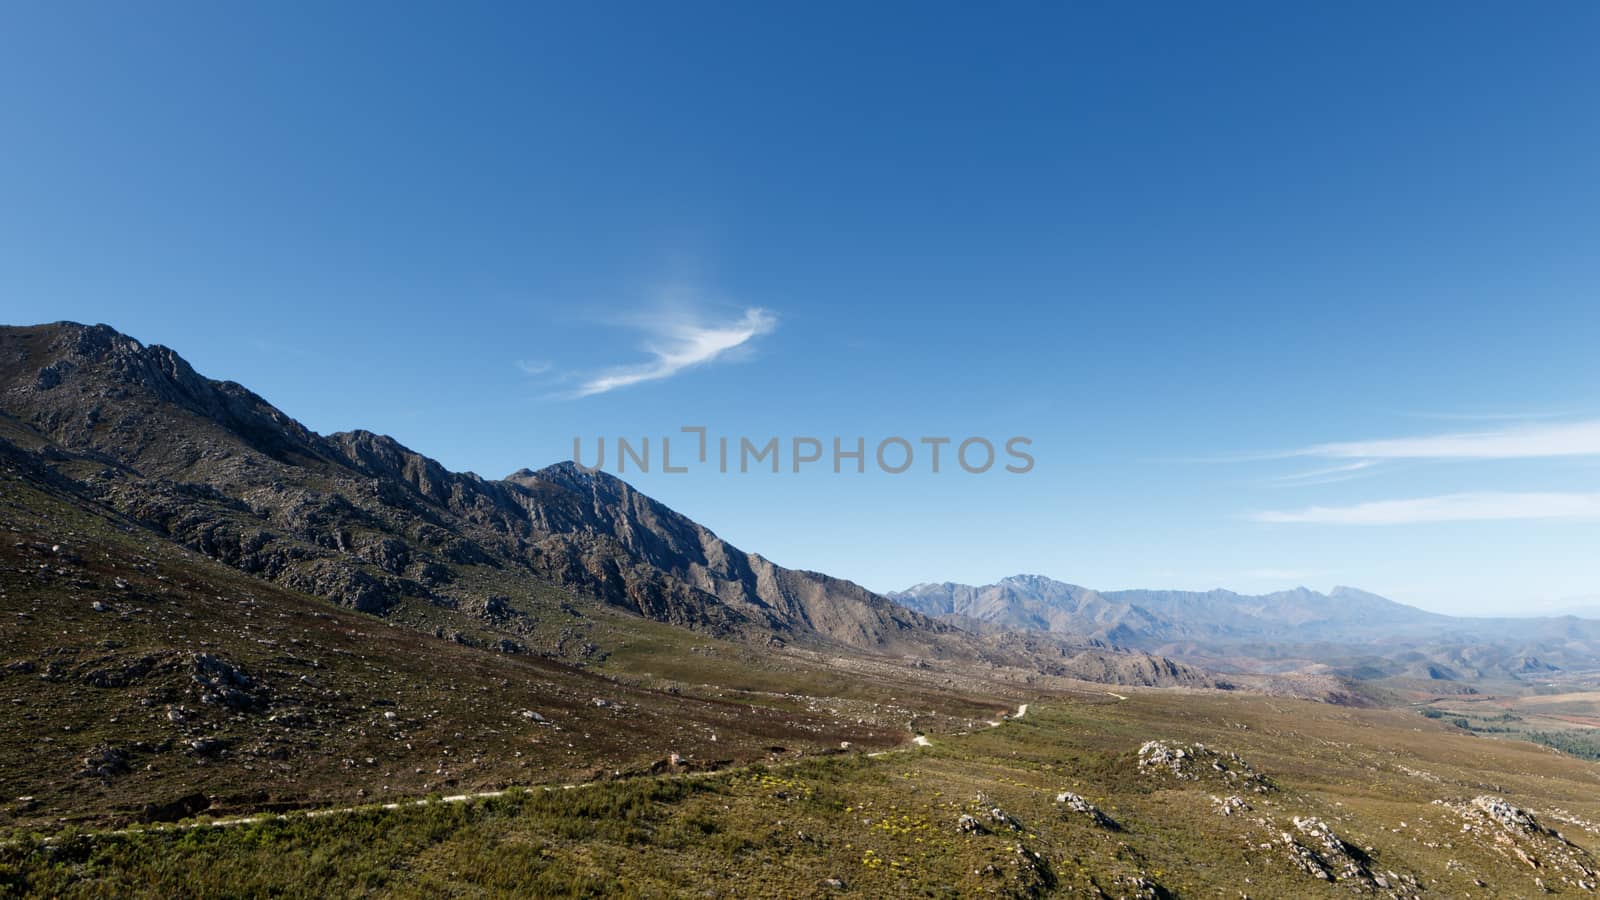 Overlooking the swartberg mountains with blue skies and green fields